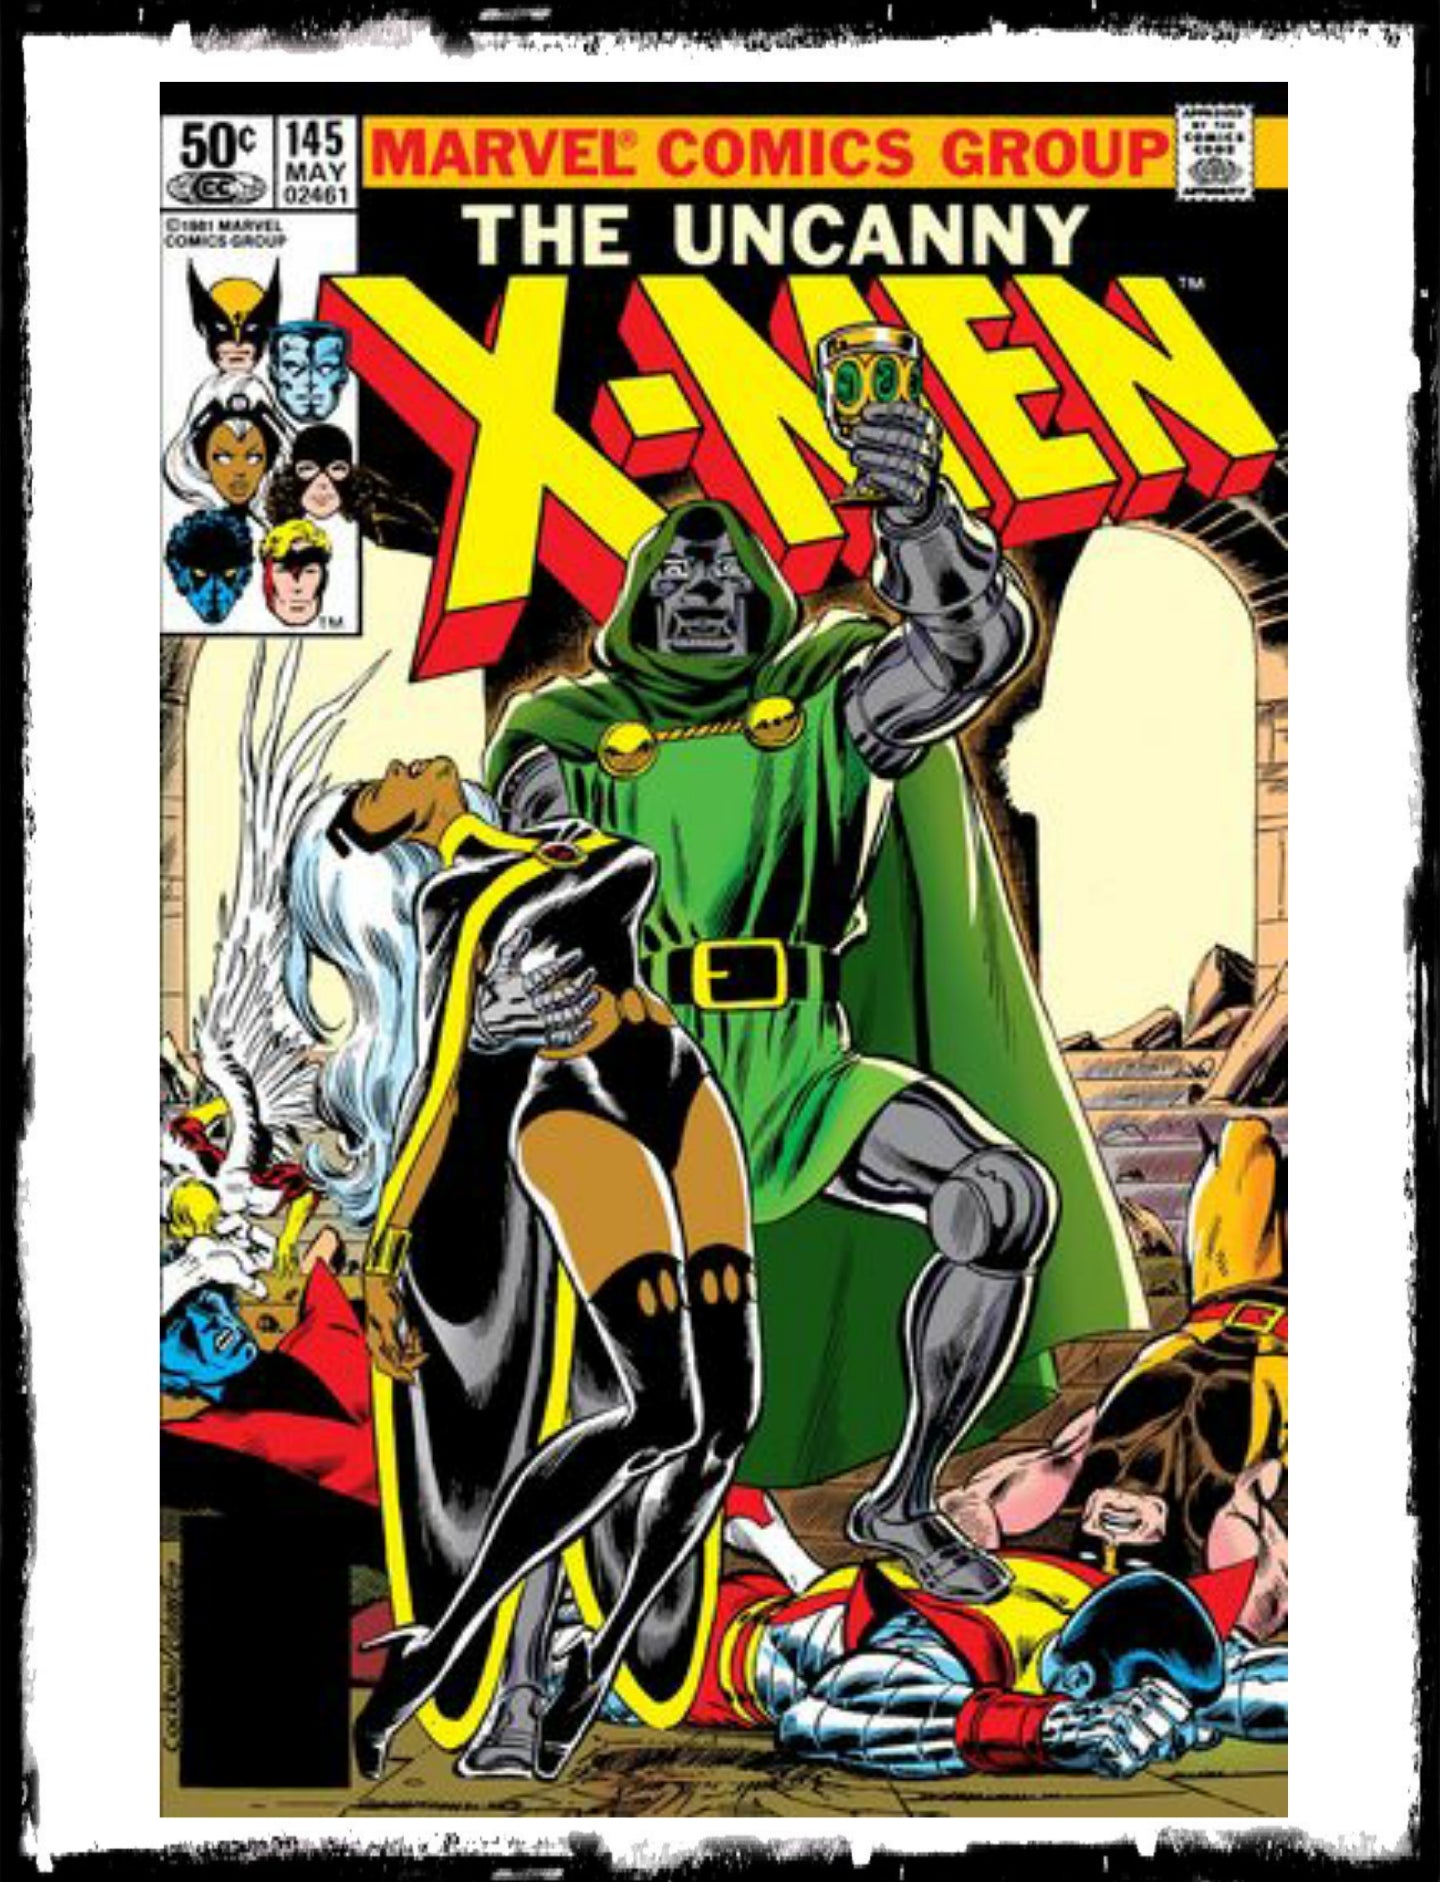 UNCANNY X-MEN - #145 KIDNAPPED! CLASSIC DOCTOR DOOM COVER (1981 - VF+/NM)